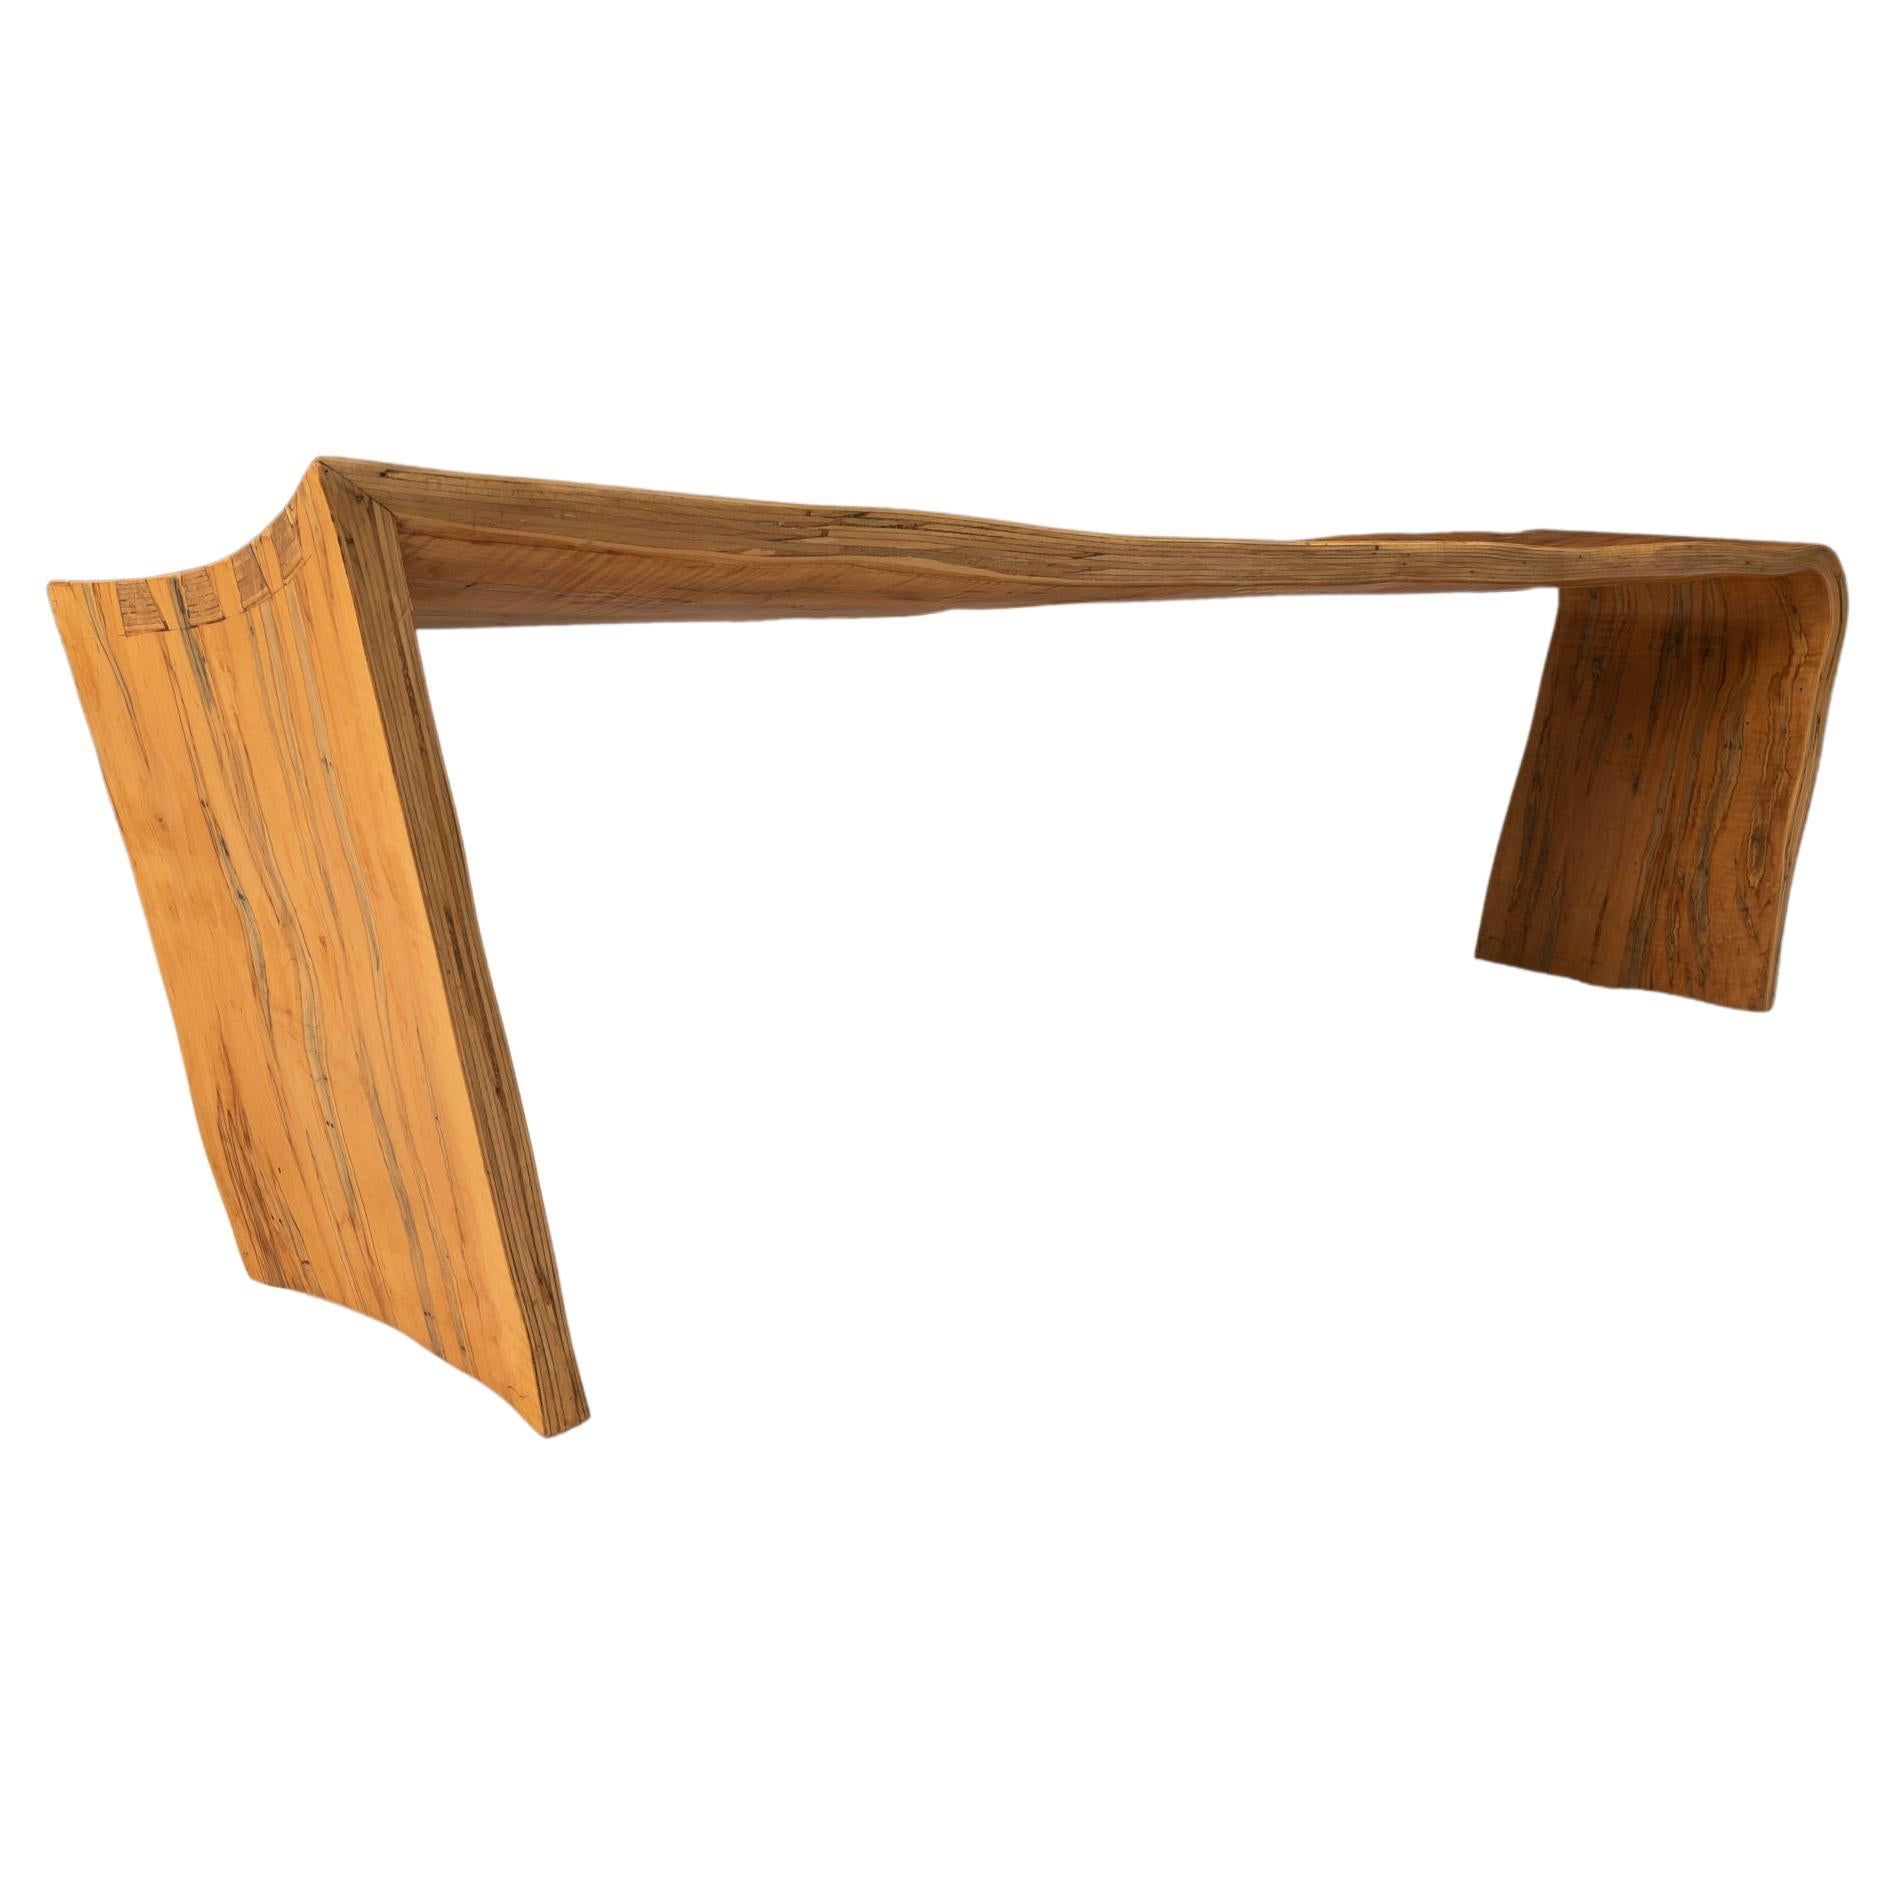 Bentwood Asymmetrical Abstract Three Seater Bench in Ambrosia Maple, Usa, 1980s For Sale